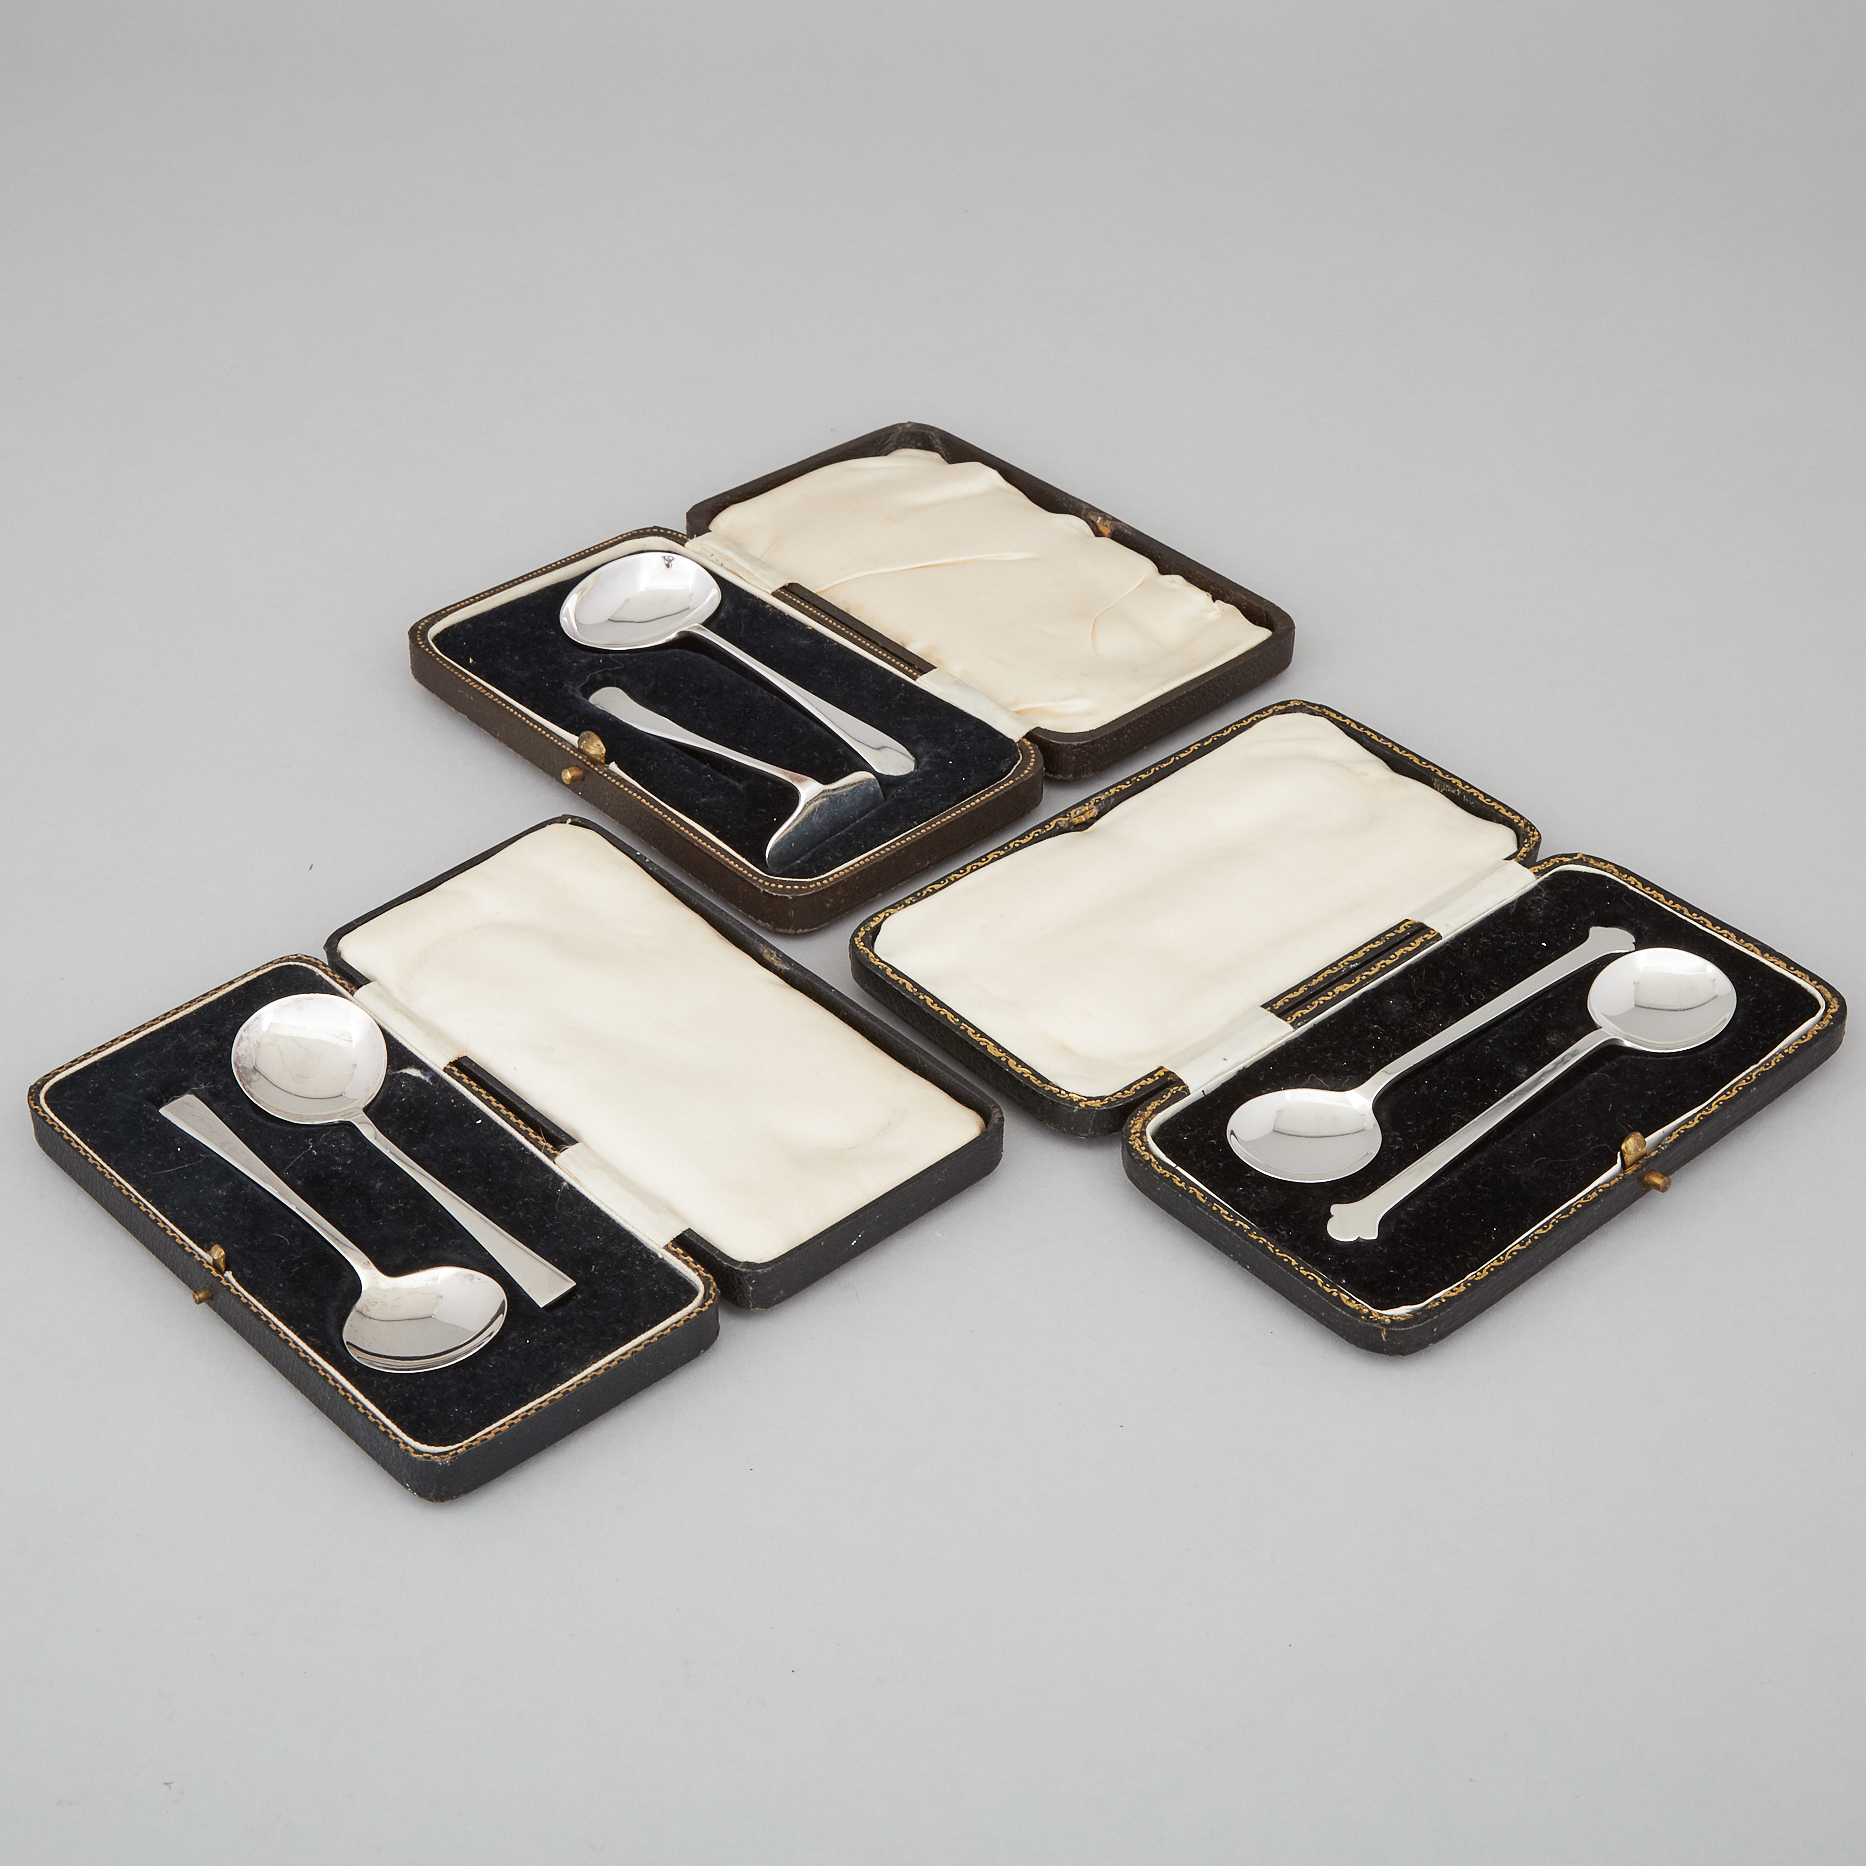 English Silver Baby's Pusher and Spoon and Two Pairs of Small Spoons, Sheffield, 1929-36